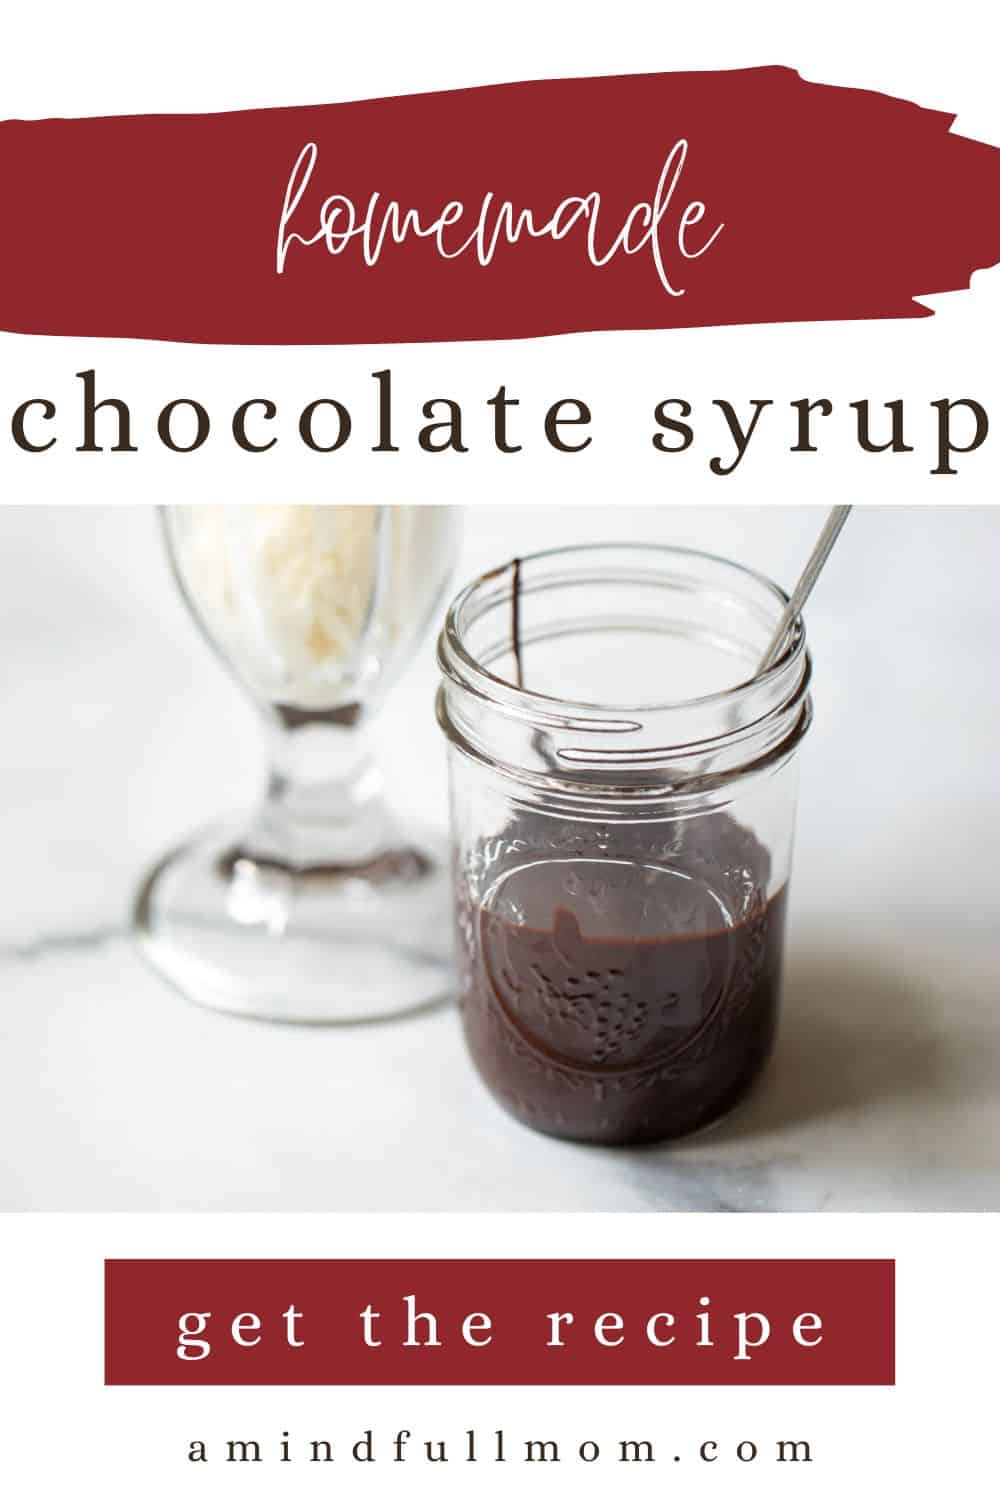 With only 5 ingredients and 5 minutes of prep, you can have a delicious, smooth, chocolate syrup